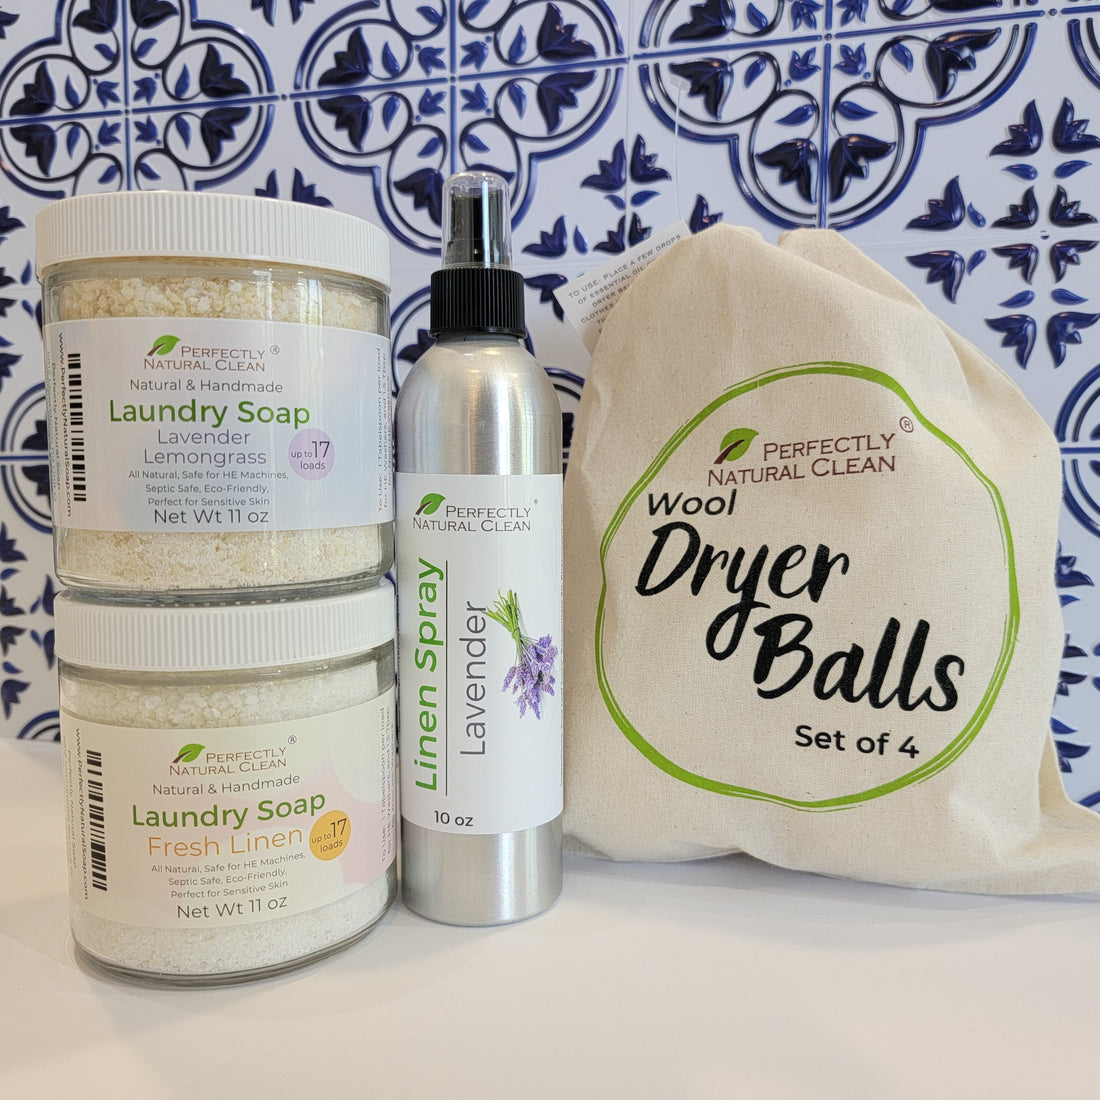 Natural Laundry products from Perfectly Natural Soap